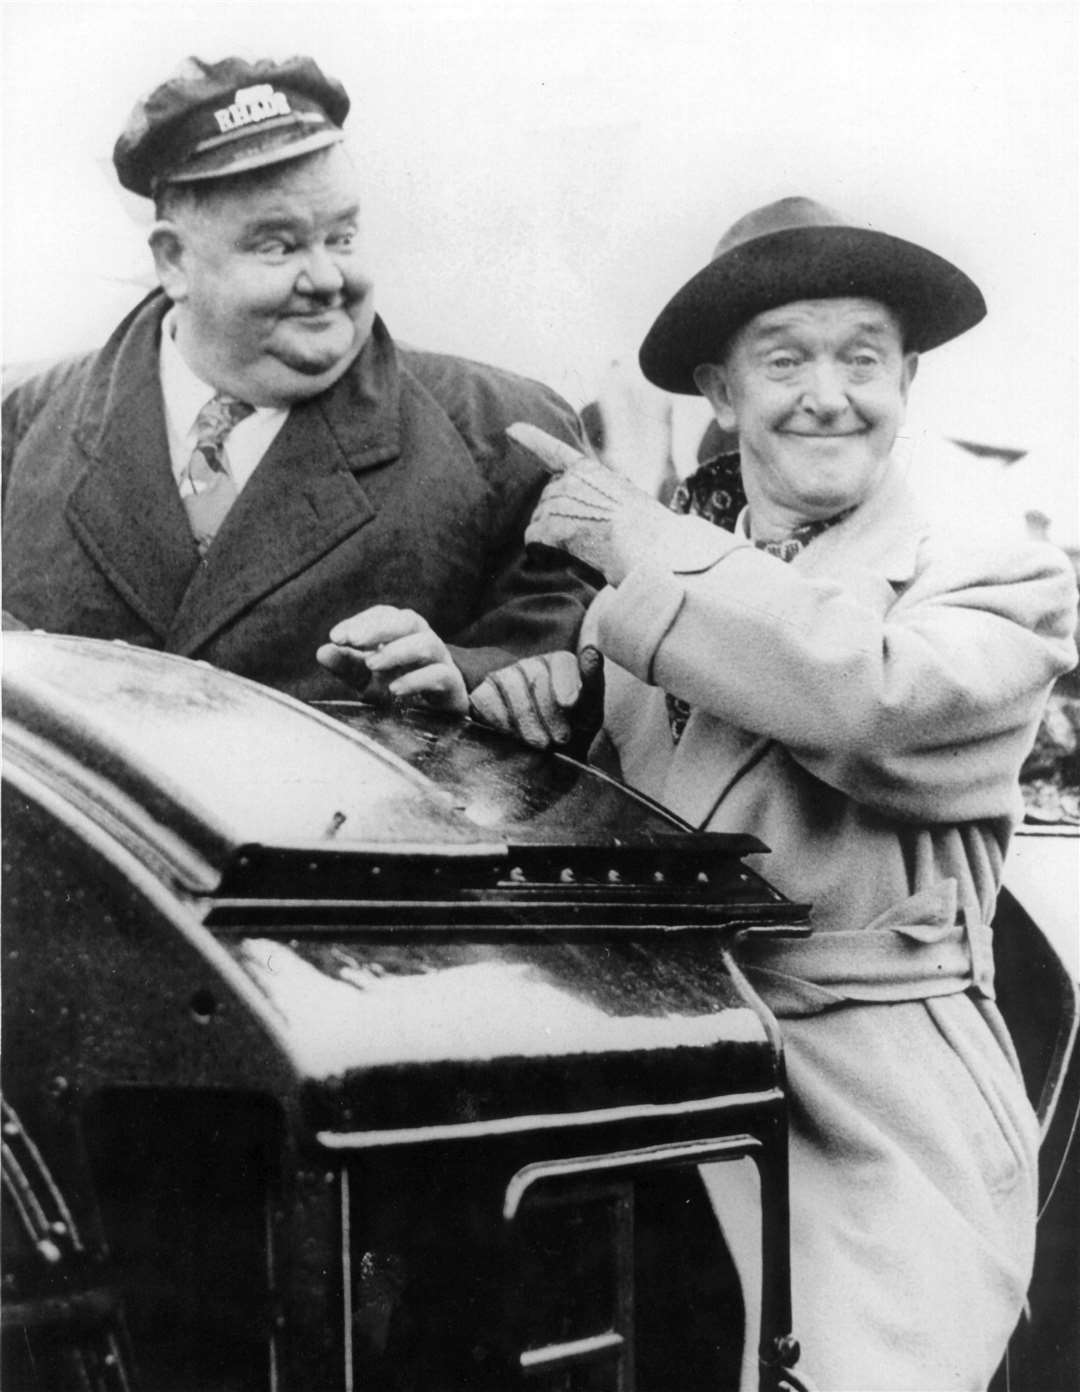 Stan Laurel, right, was another star to grace the stage at the Chatham venue. Here he is pictured with his comedy partner Oliver Hardy at the reopening of the Romney Hythe and Dymchurch Railway after the Second World War